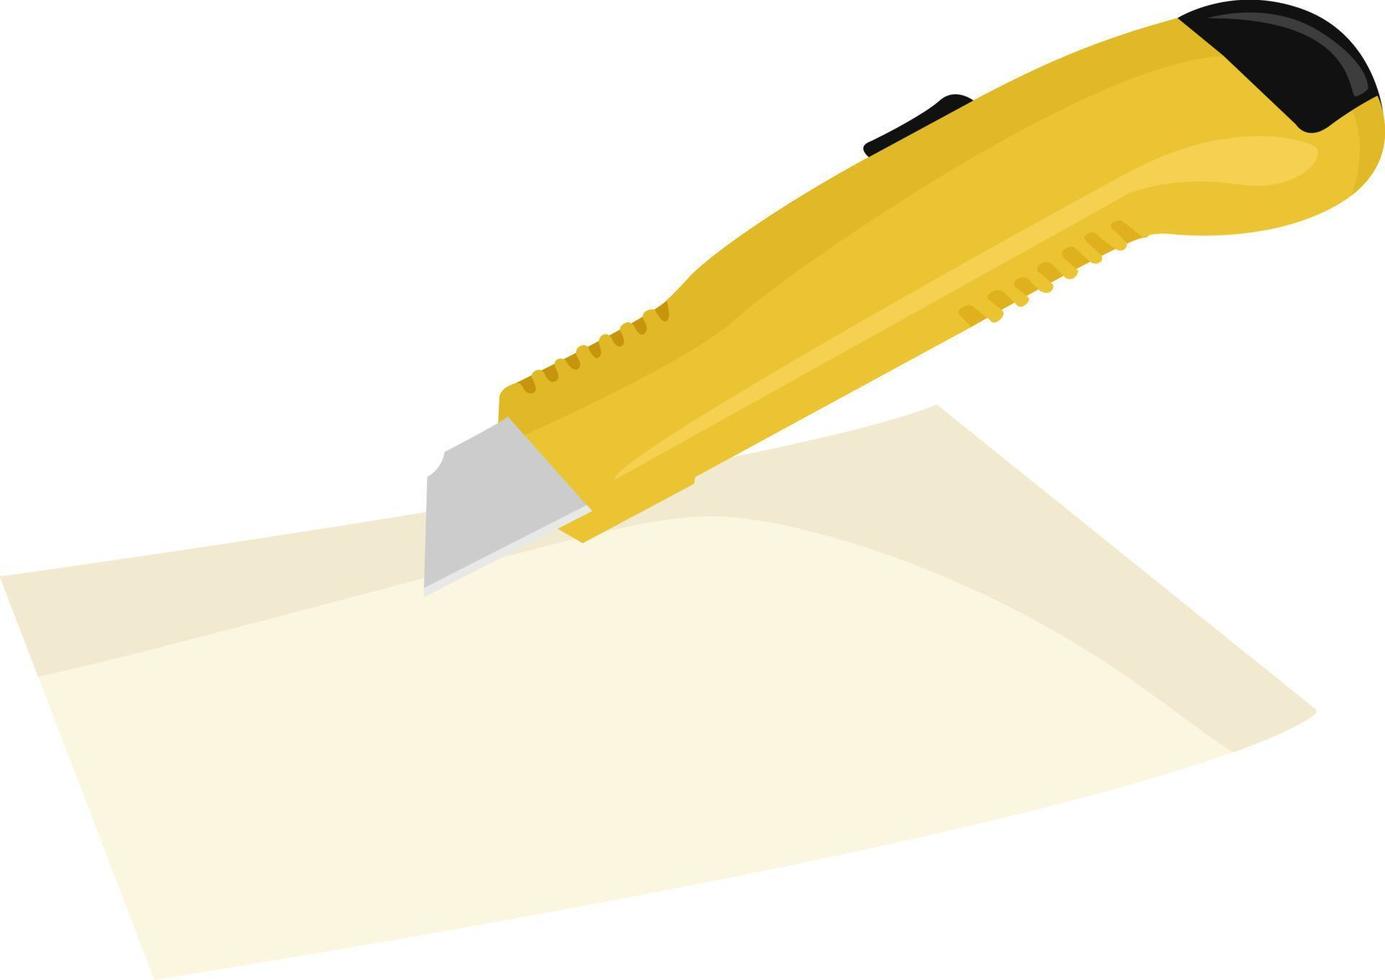 Paper cutter, illustration, vector on white background